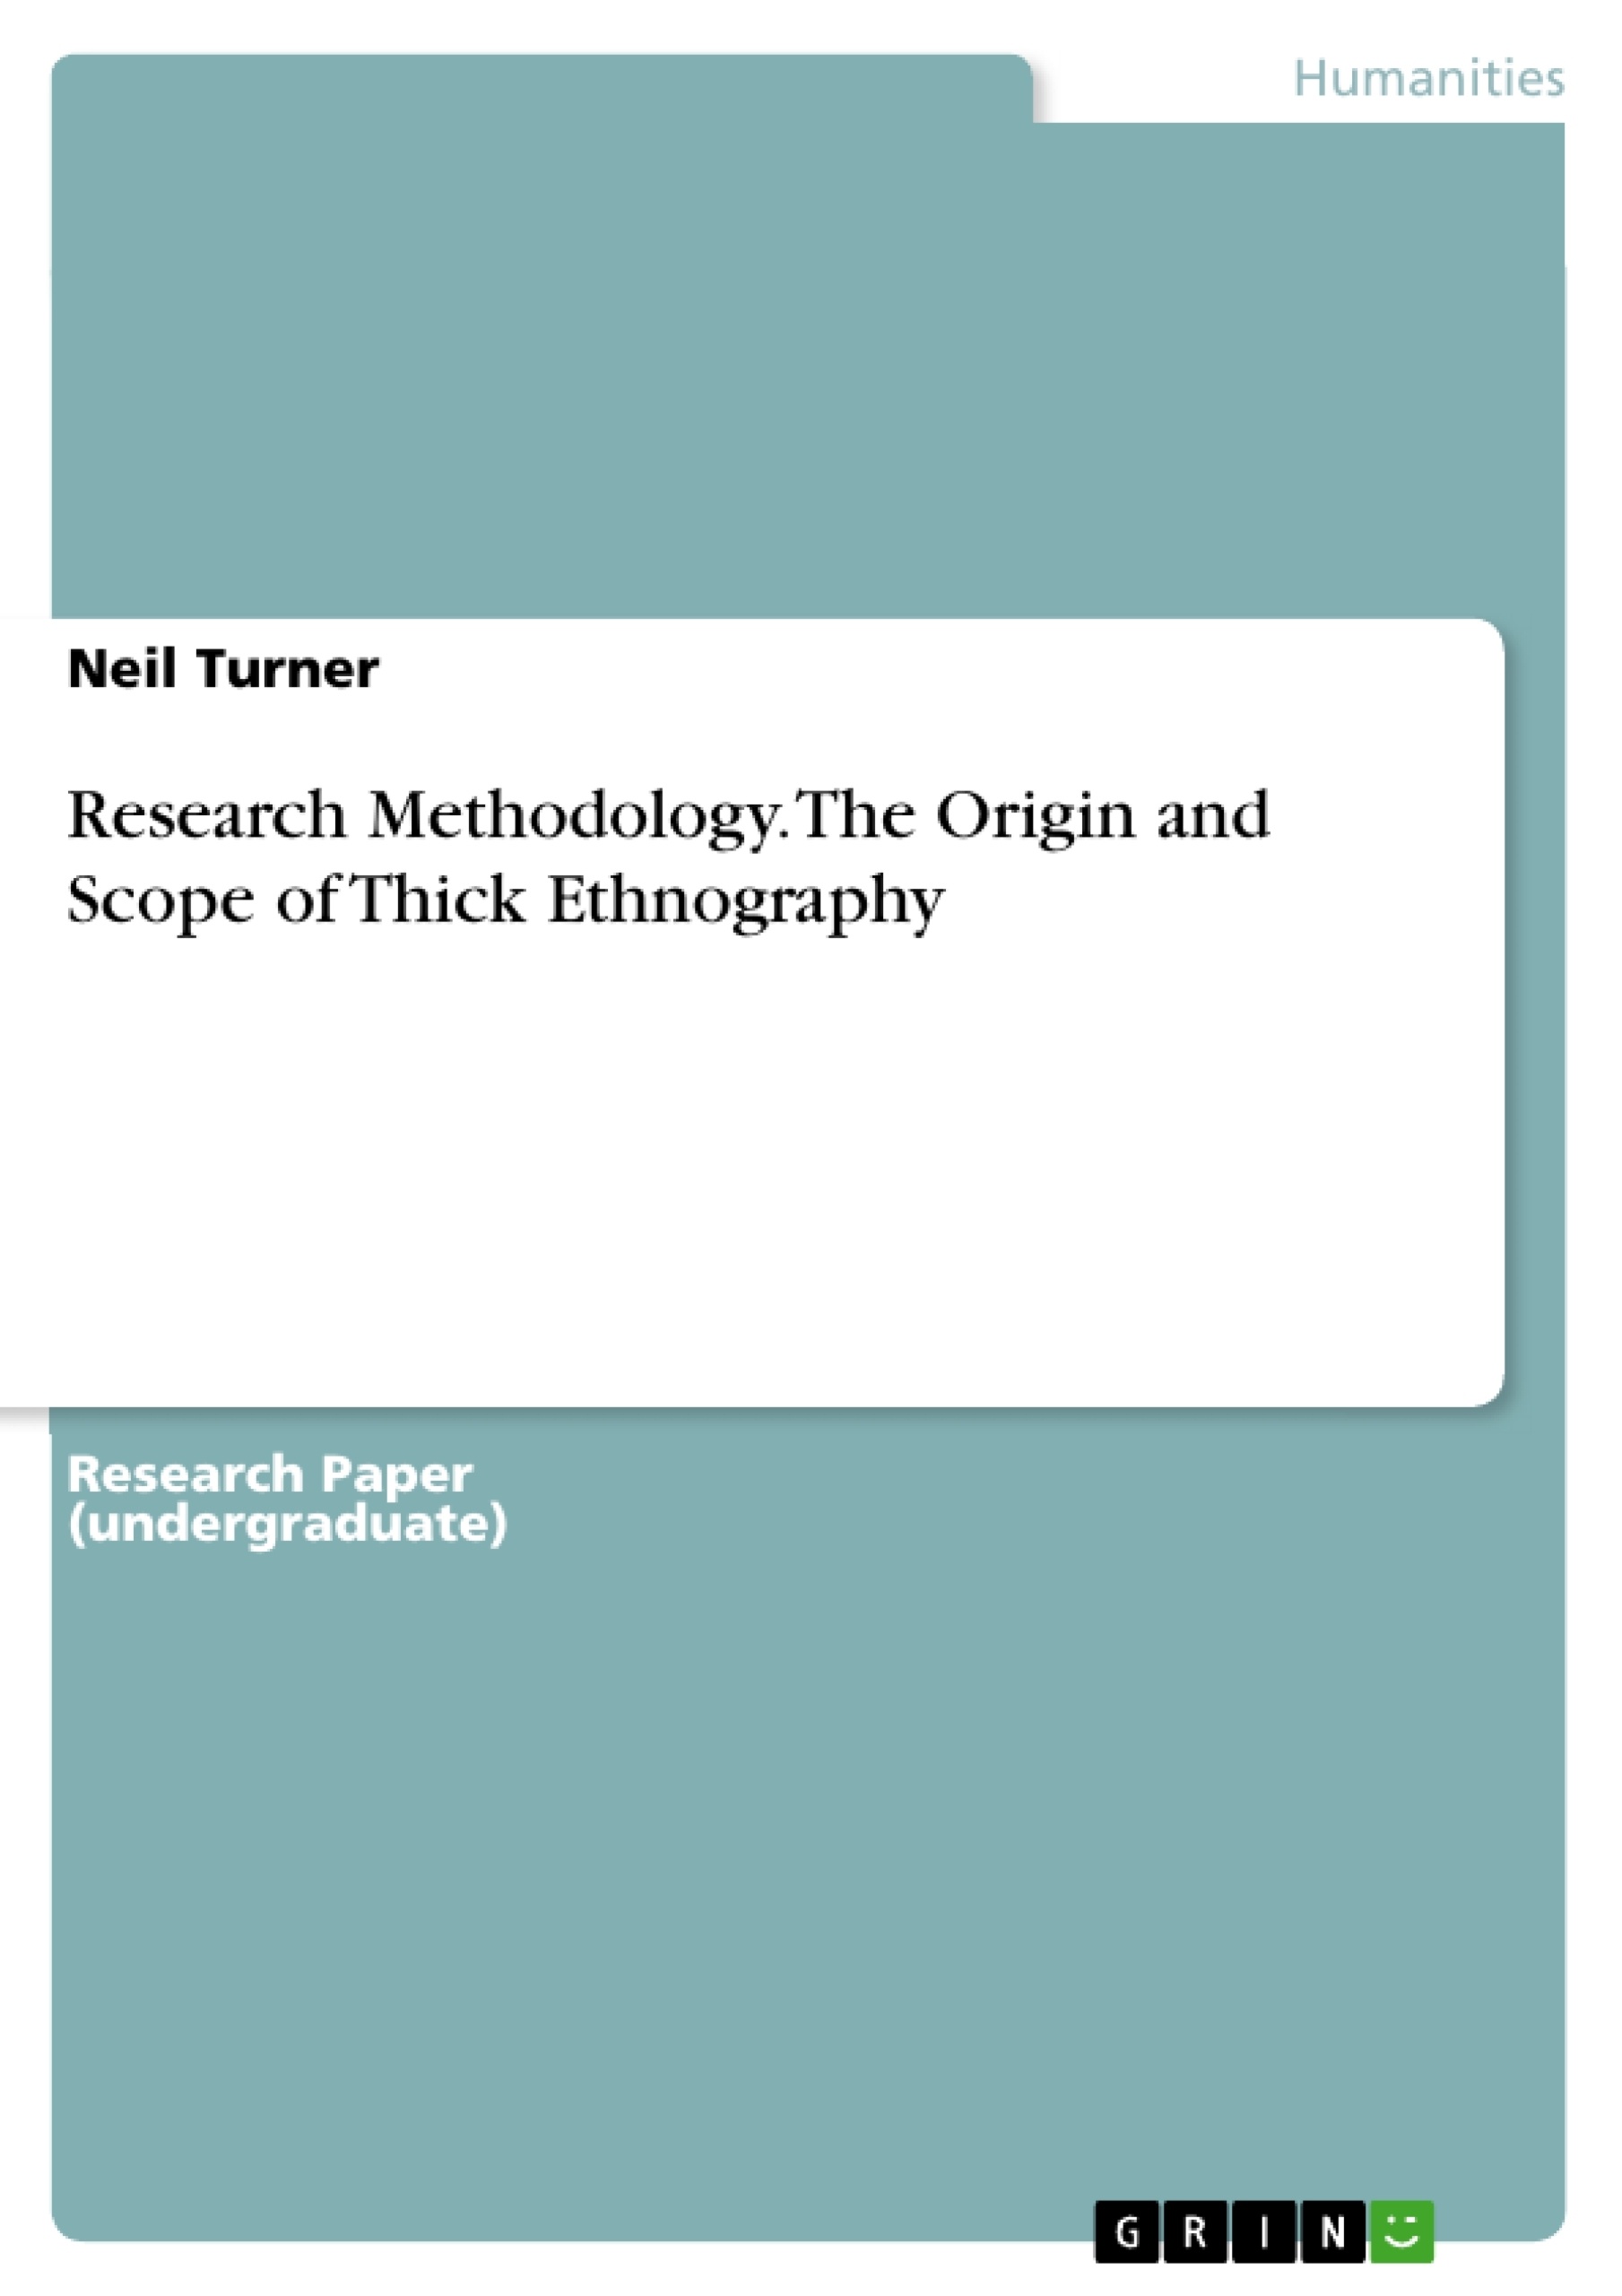 Título: Research Methodology. The Origin and Scope of Thick Ethnography